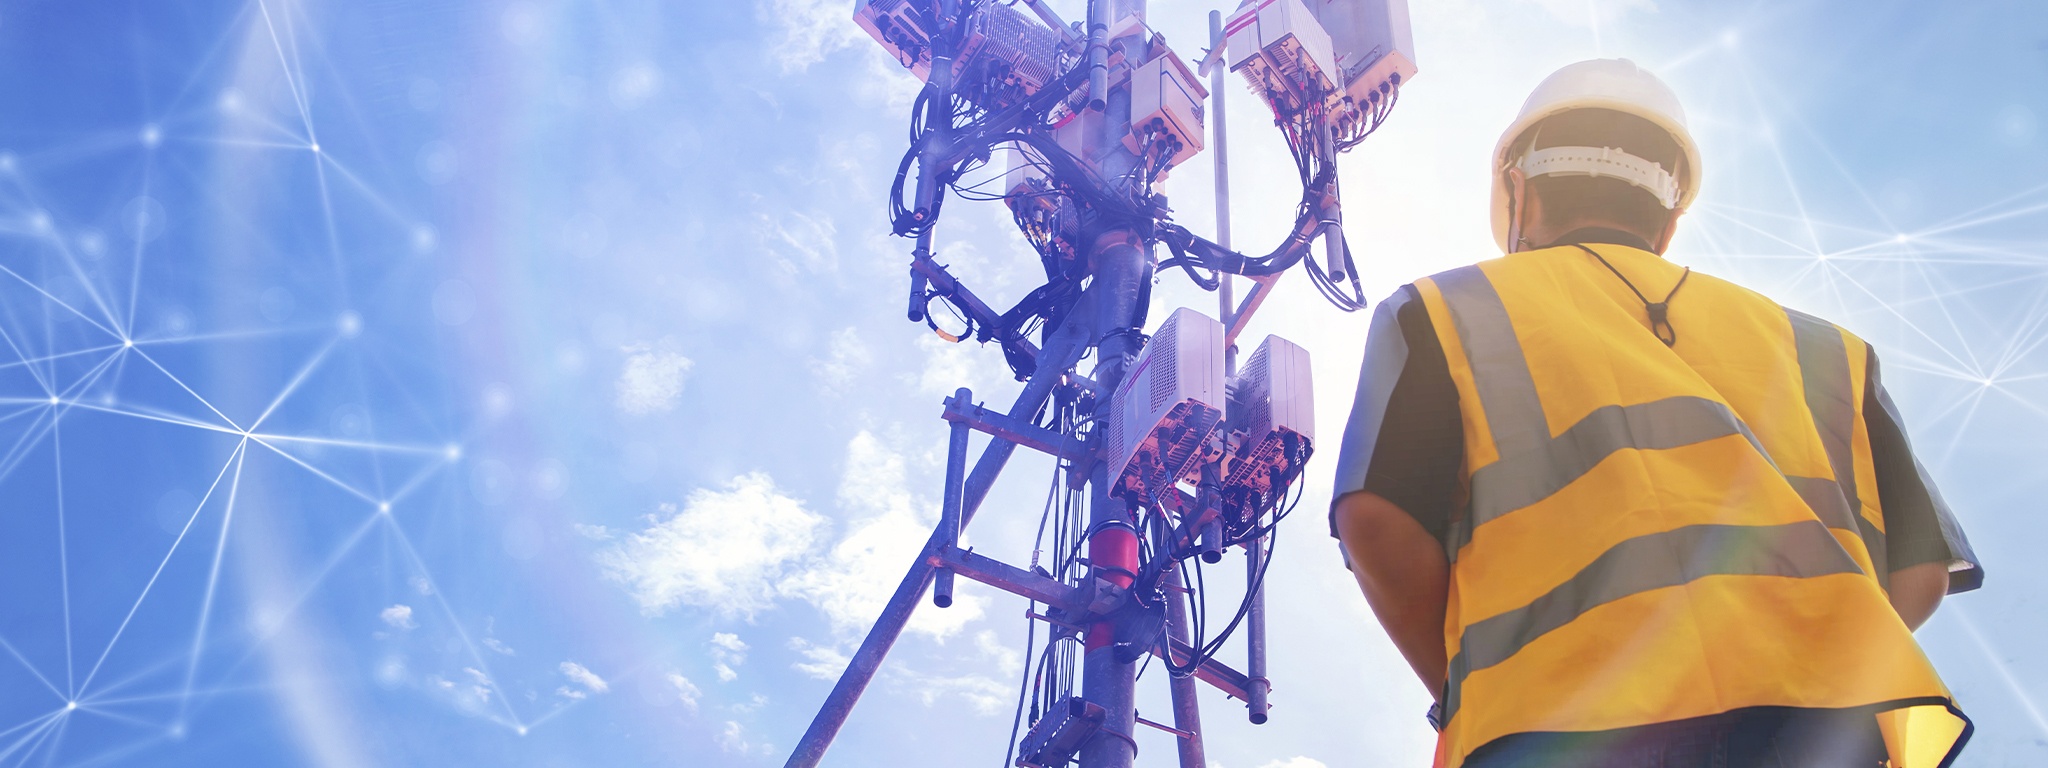 a back view of a helmeted engineer working in the field with a telecommunication tower in front of him